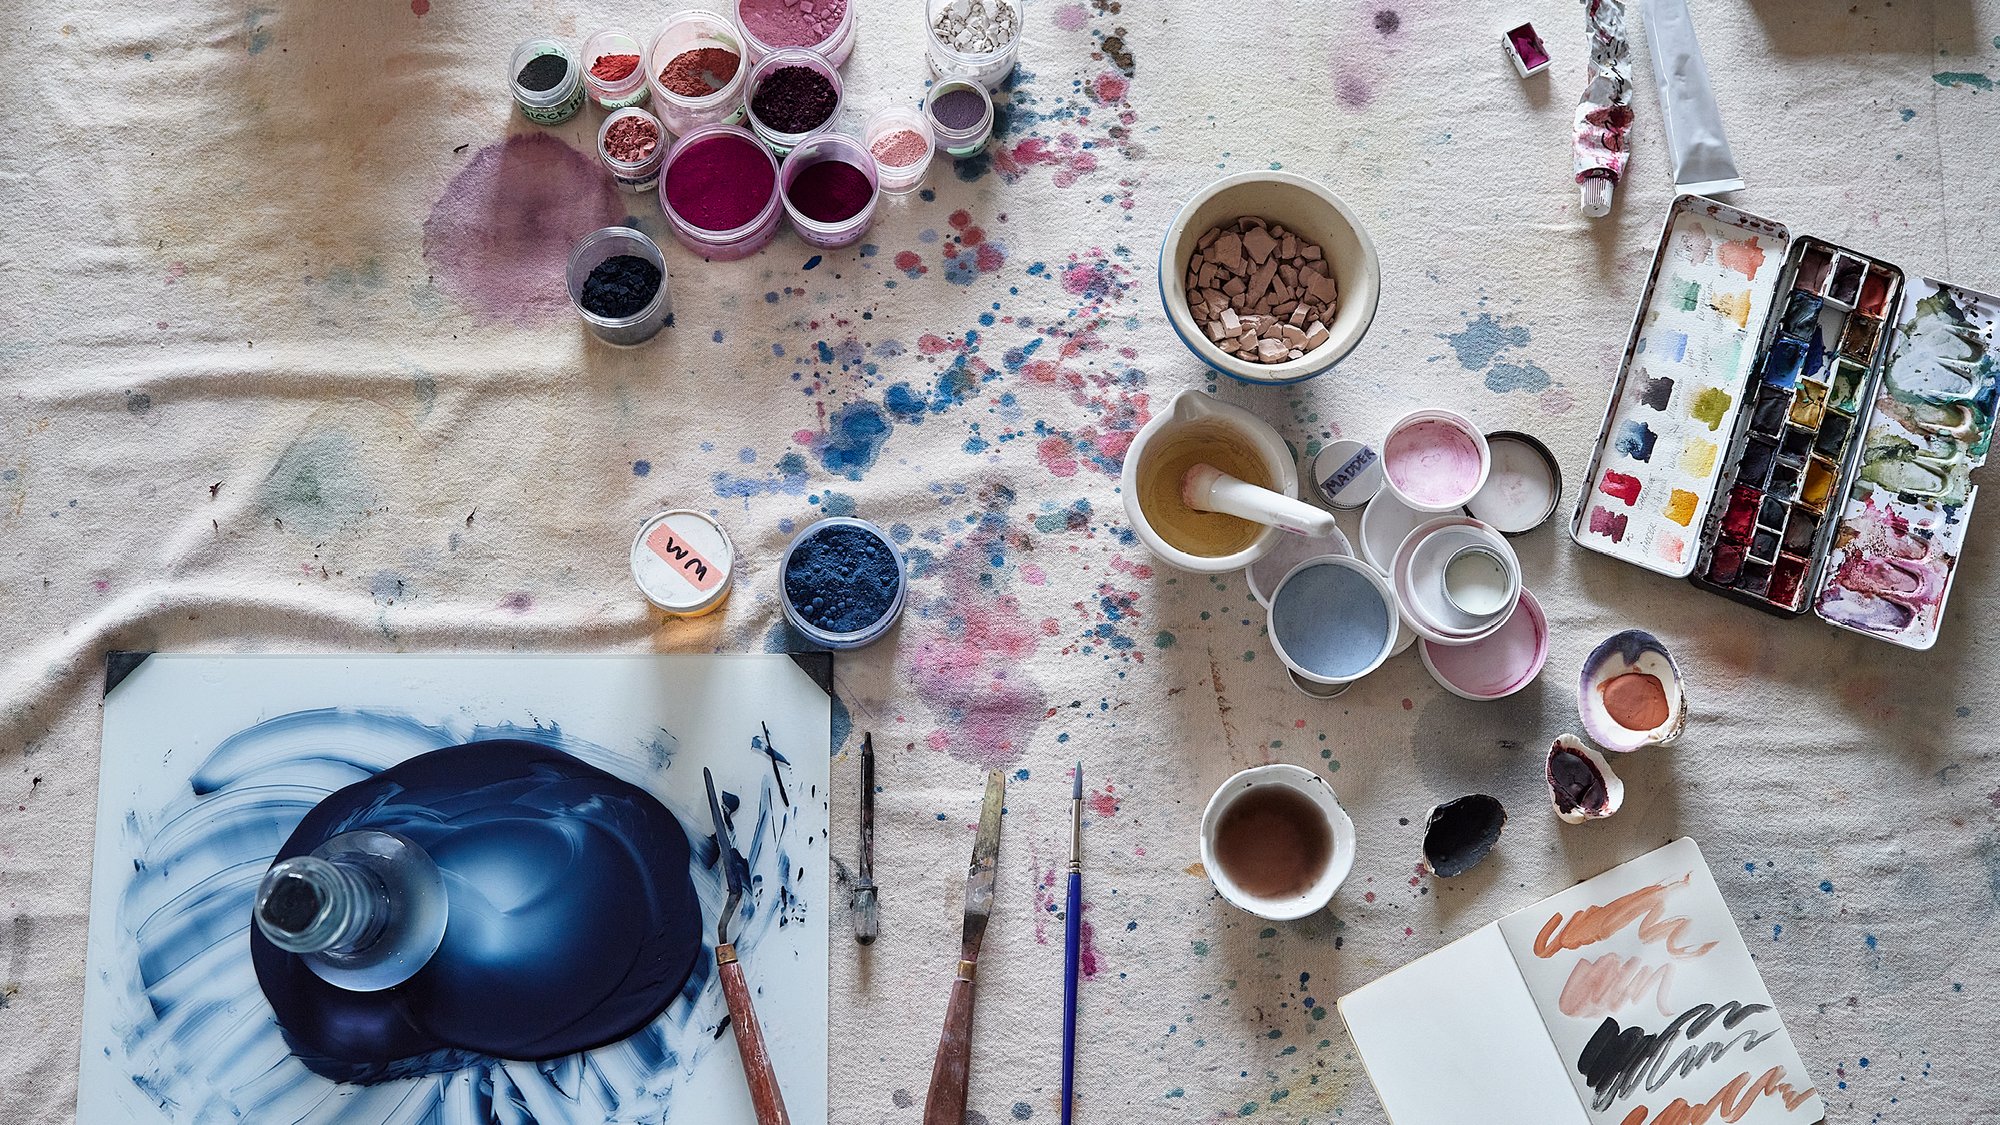 The Organic Artist: Make Your Own Paint, Paper, Pigments, Prints and More from Nature [Book]